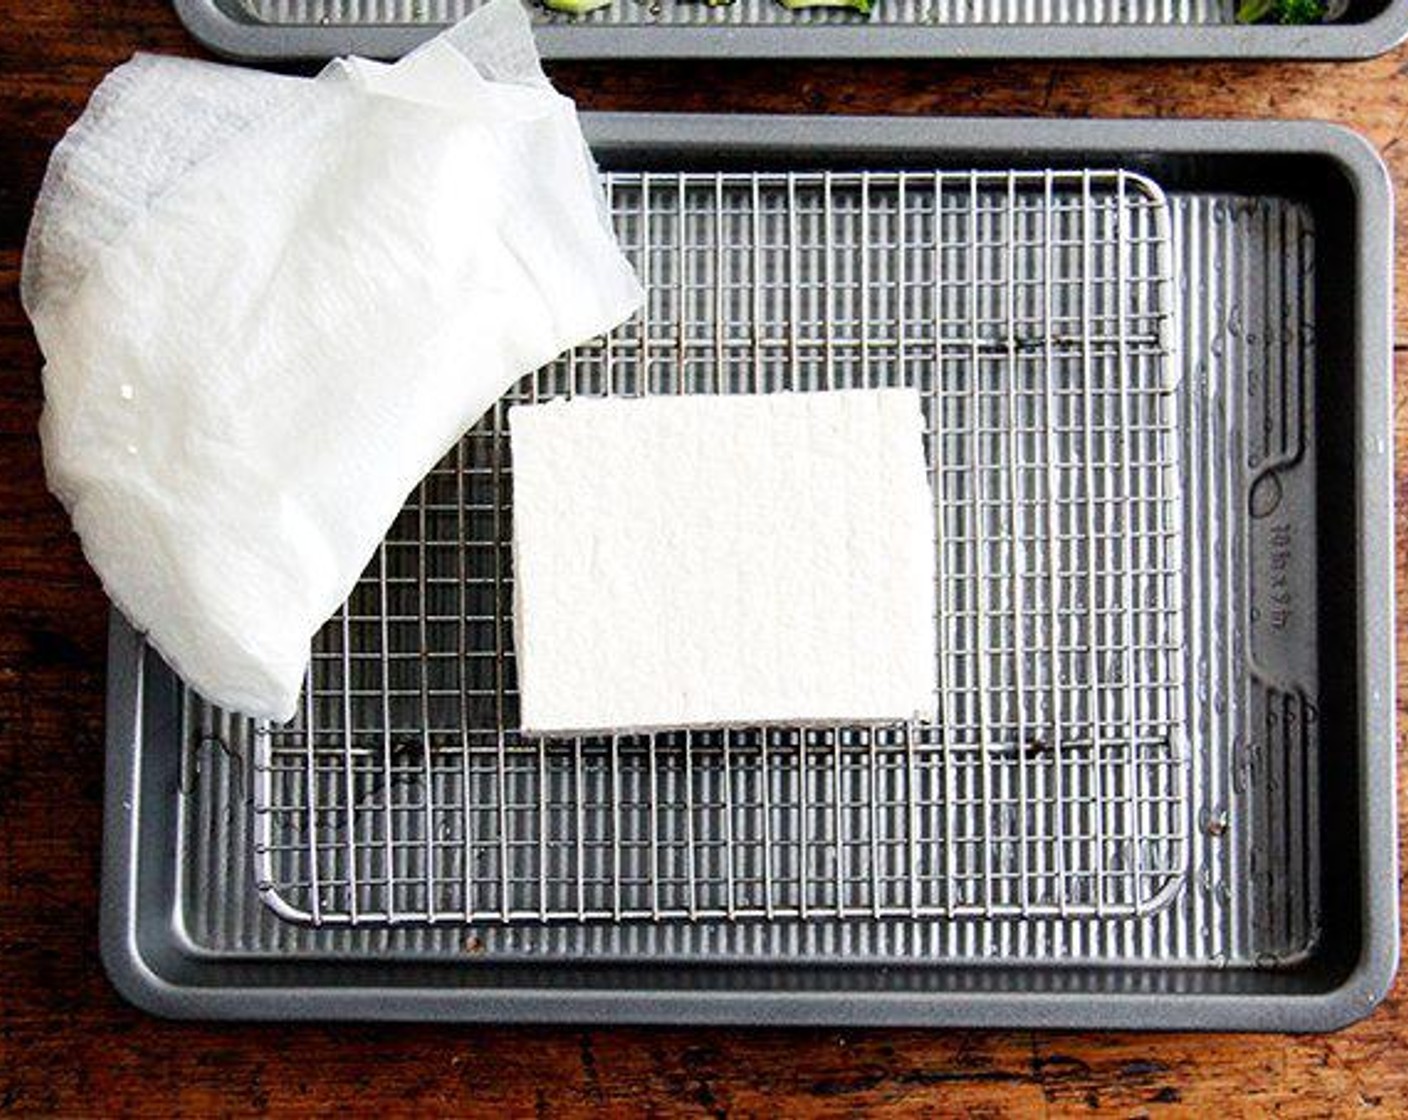 step 1 Prepare the tofu: Drain the Extra Firm Tofu (1 block) and place it on a few paper towels; place a few more towels over it. Place a heavy object—like a big frying pan—over the tofu, and let it rest for 10 minutes (and up to 30, if you have the time) to press out the excess liquid.